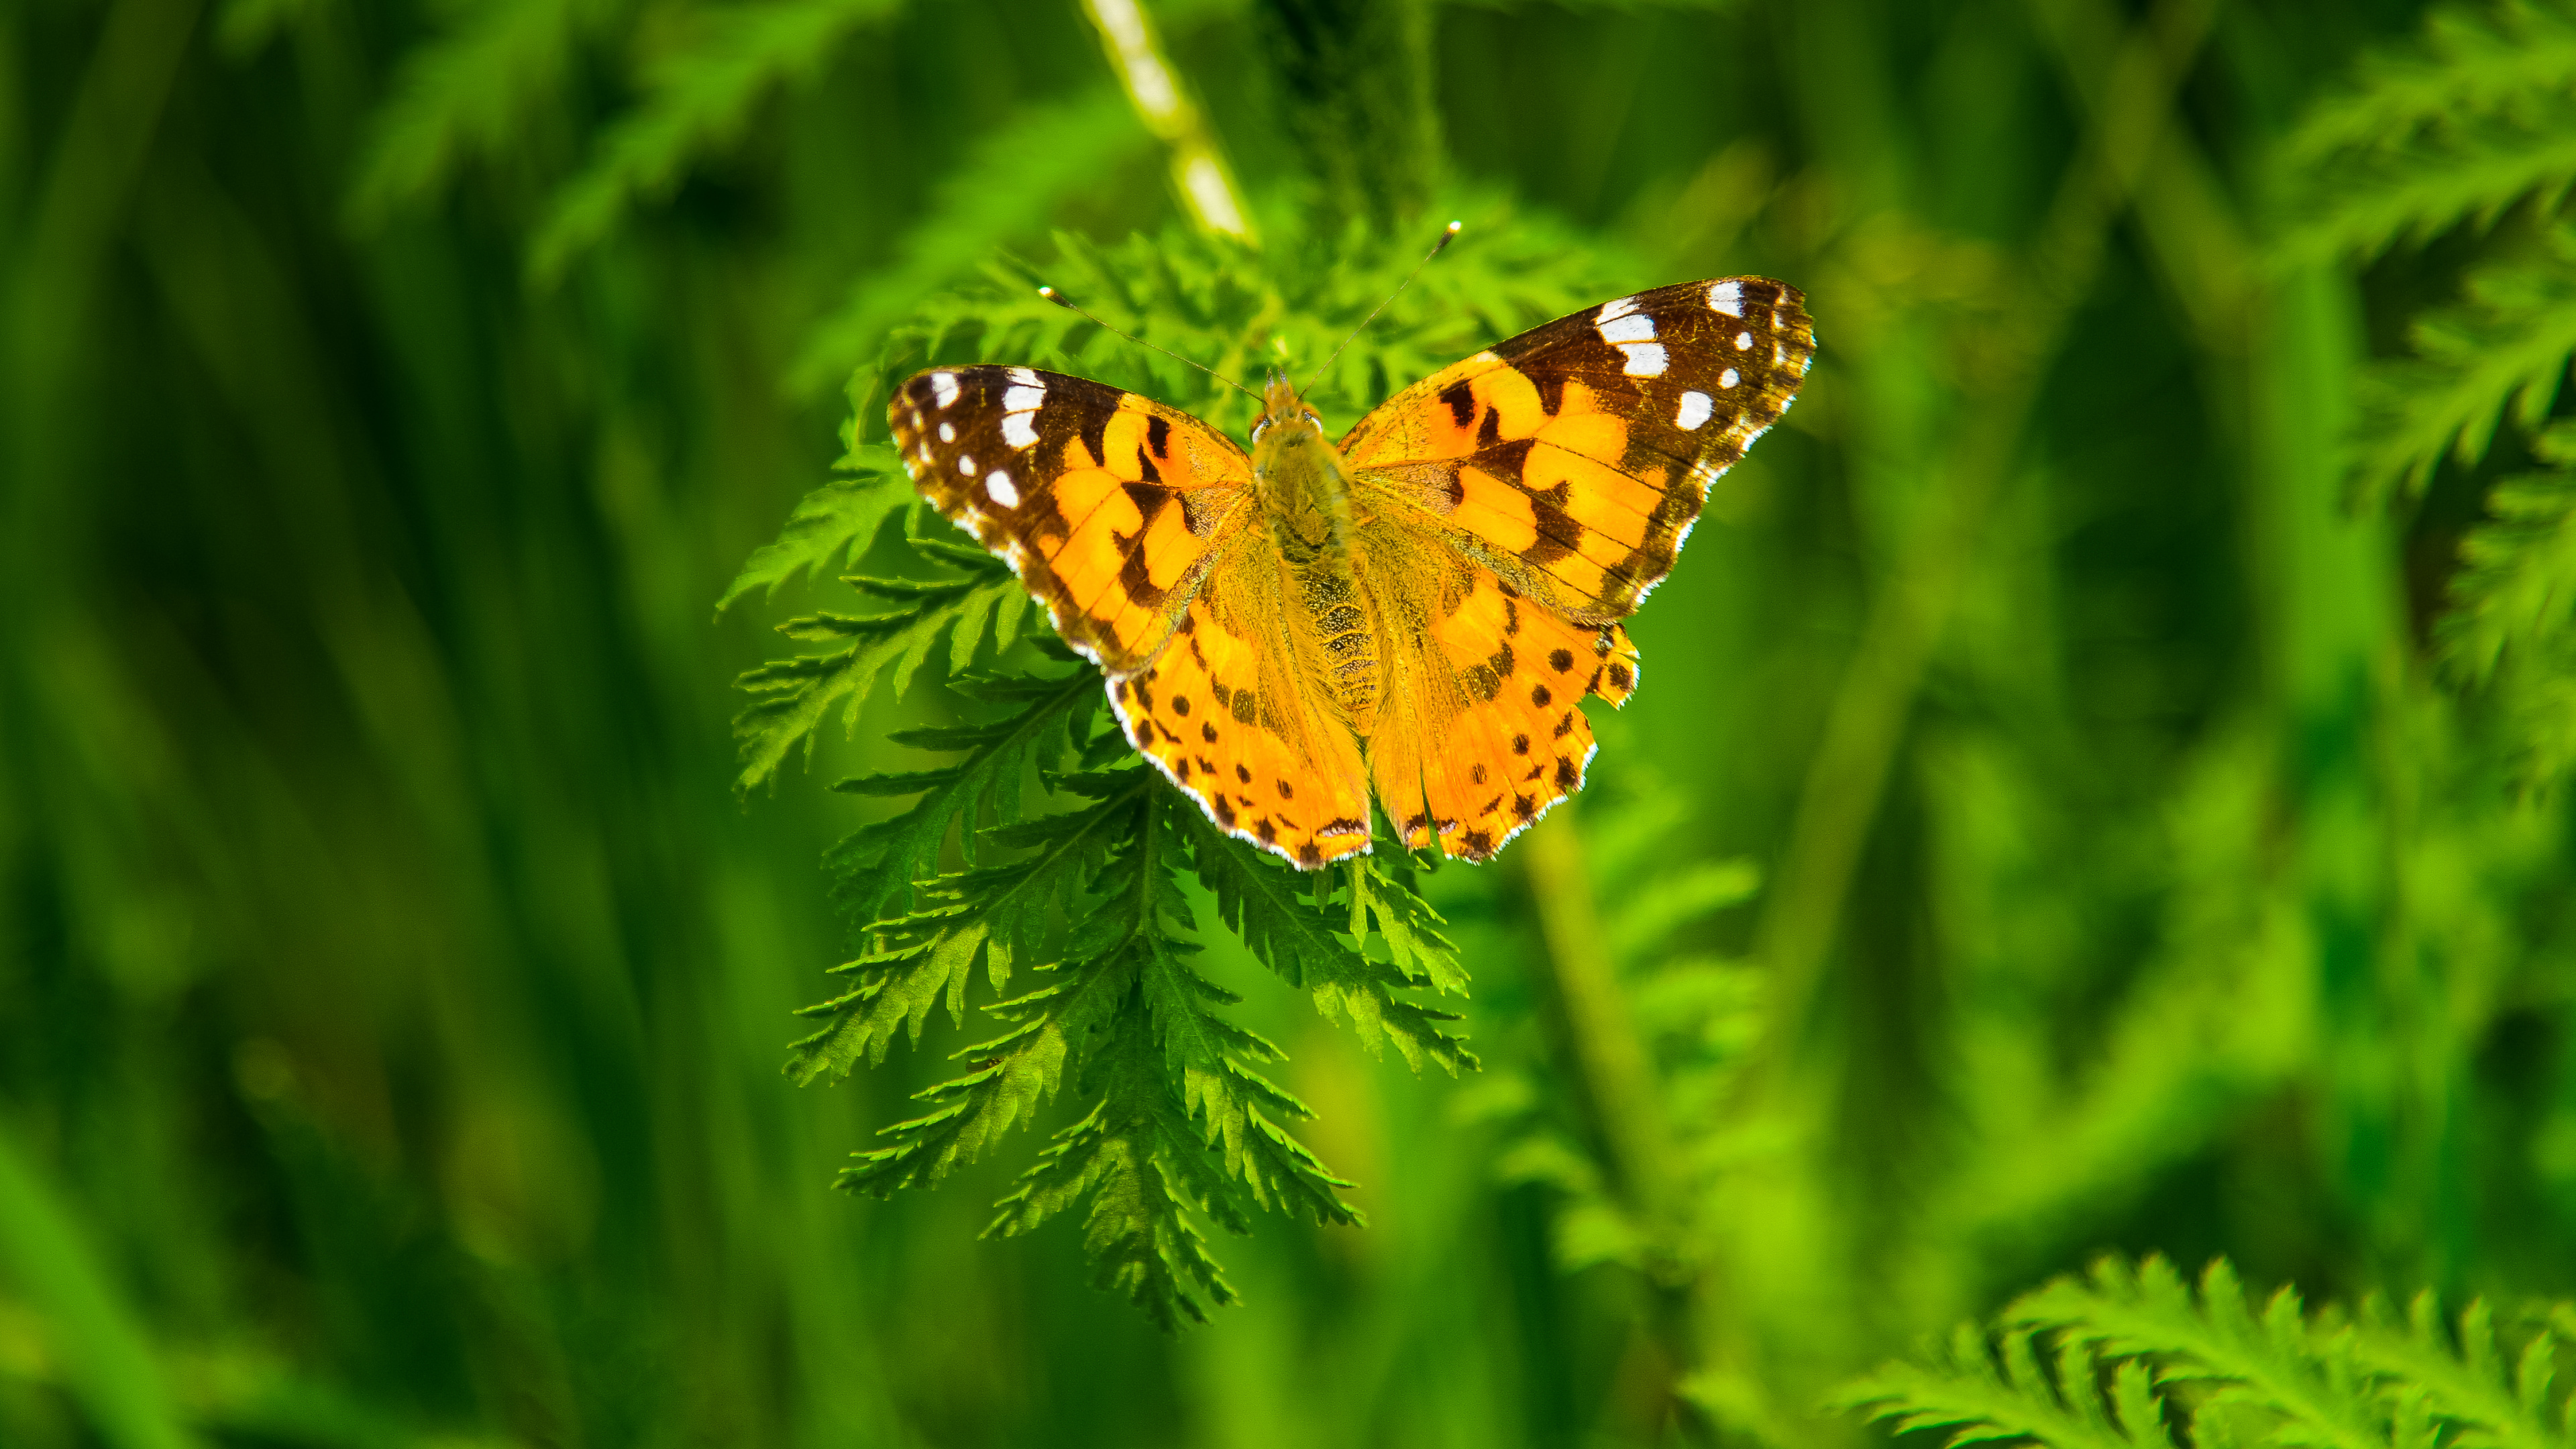 Yellow and Black Butterfly on Green Plant. Wallpaper in 3840x2160 Resolution